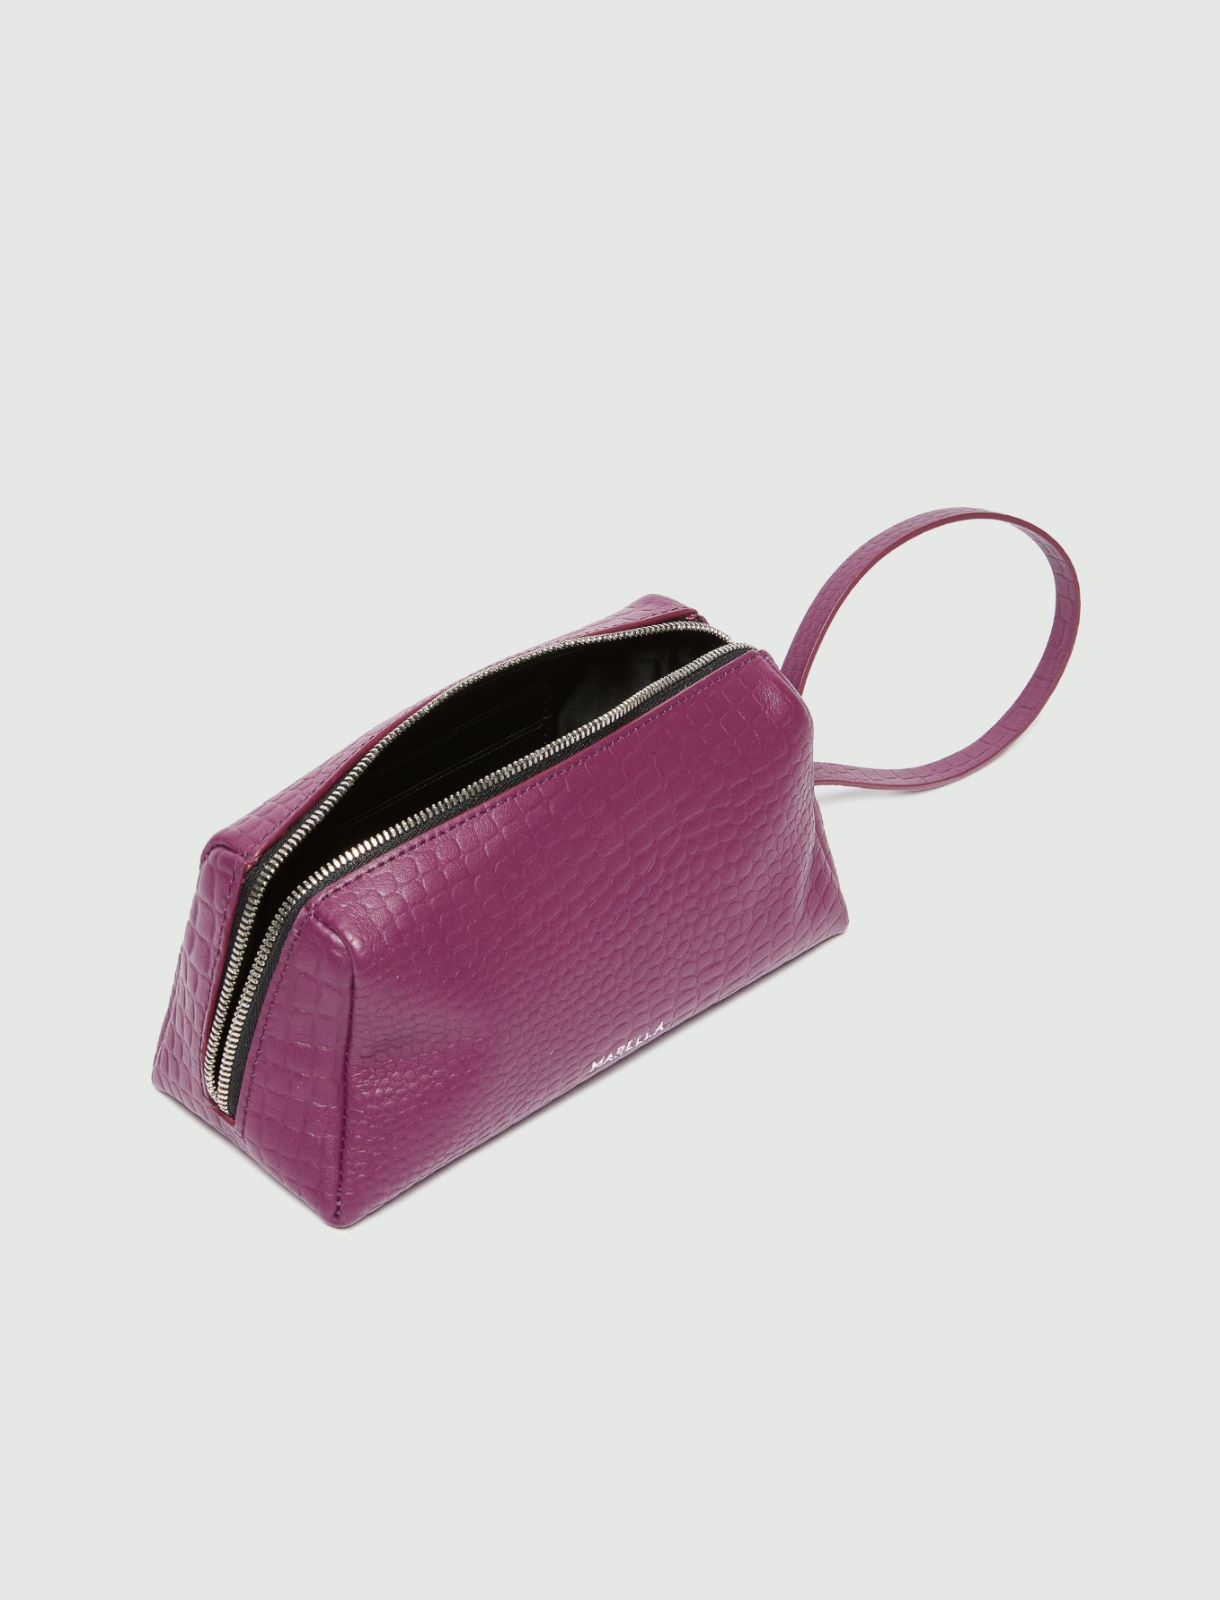 Leather toiletry bag - Must - Marella - 5